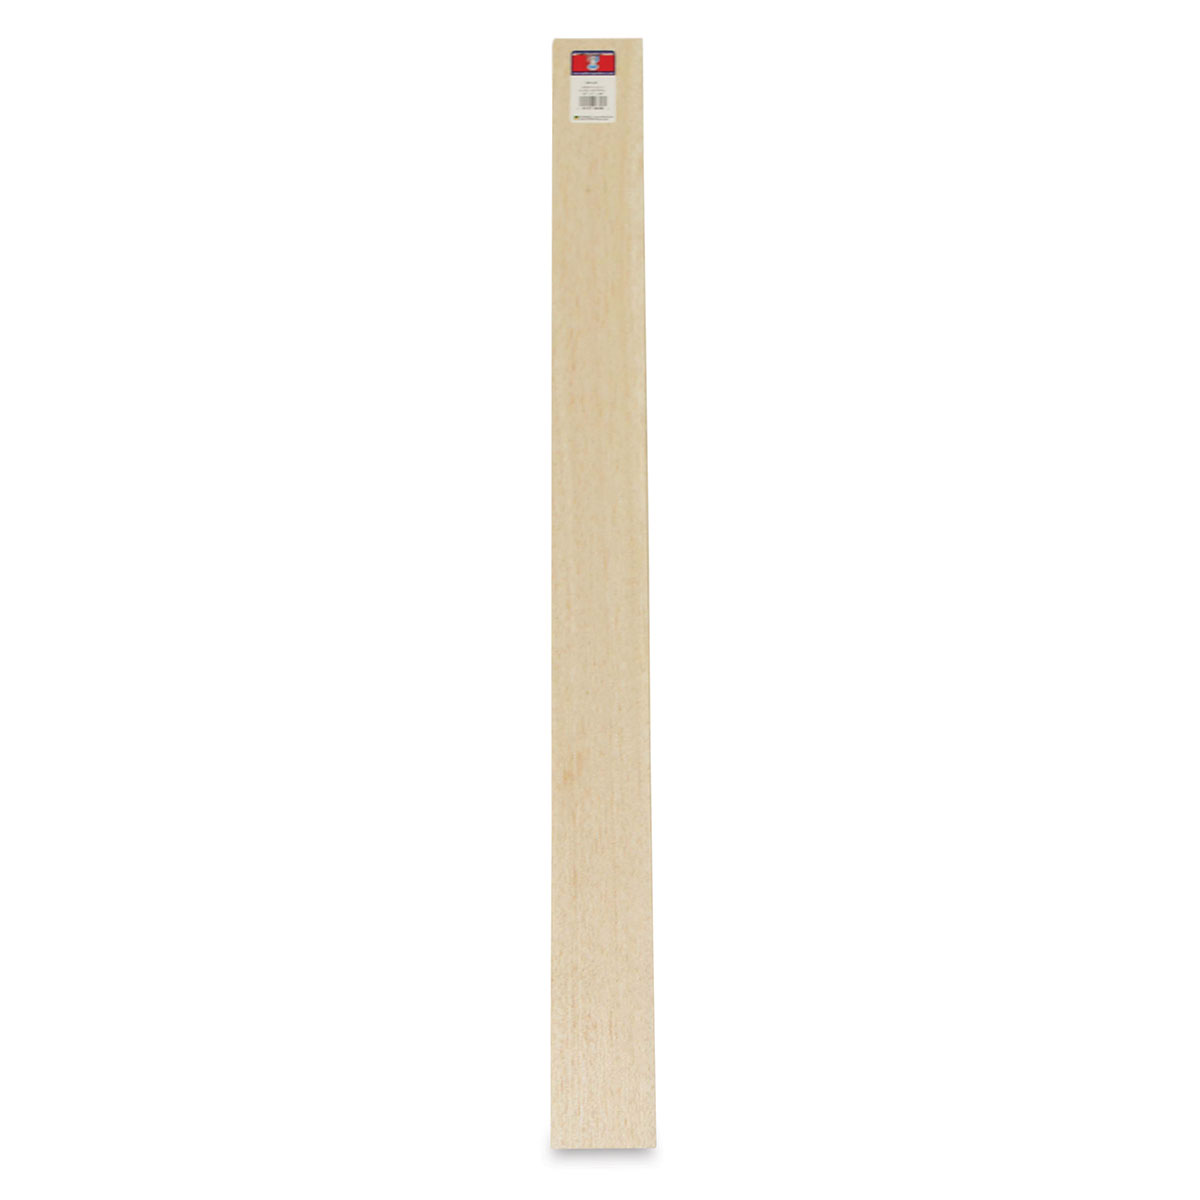 Midwest Products Balsa Wood Strips - 15 Pieces, 1/8 x 1/2 x 36